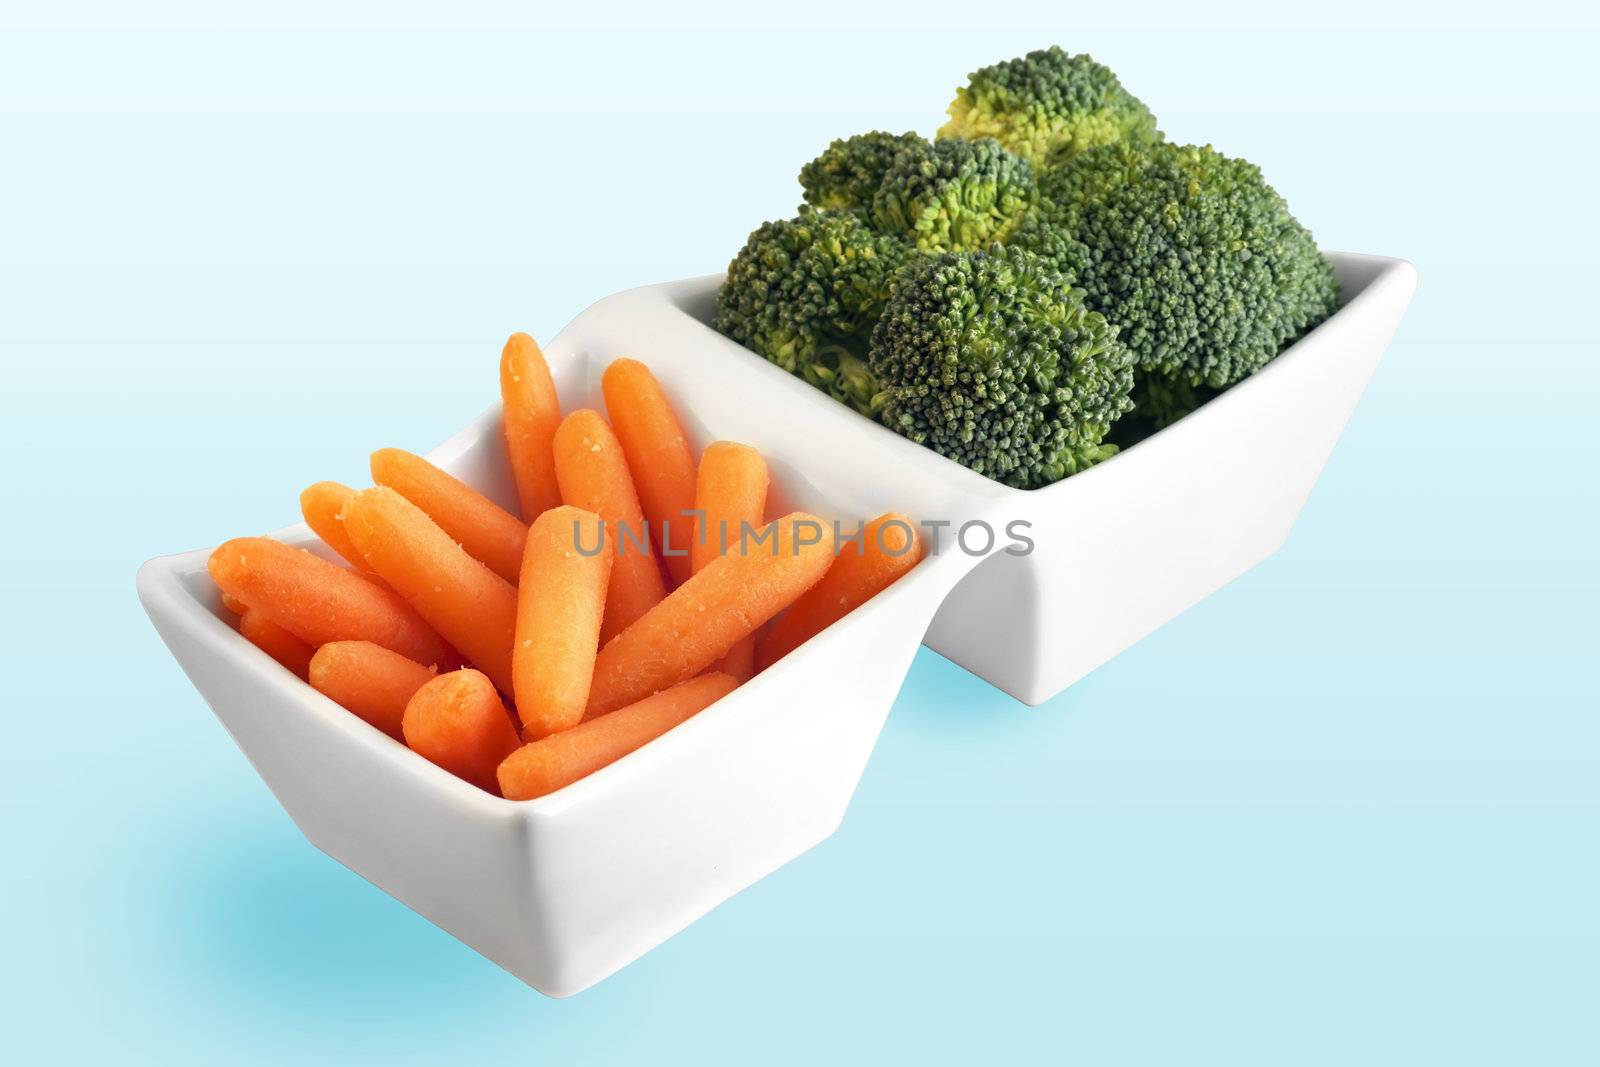 Healthy food choice from the vegetable garden: carrot and broccoli in cute white serving plate.